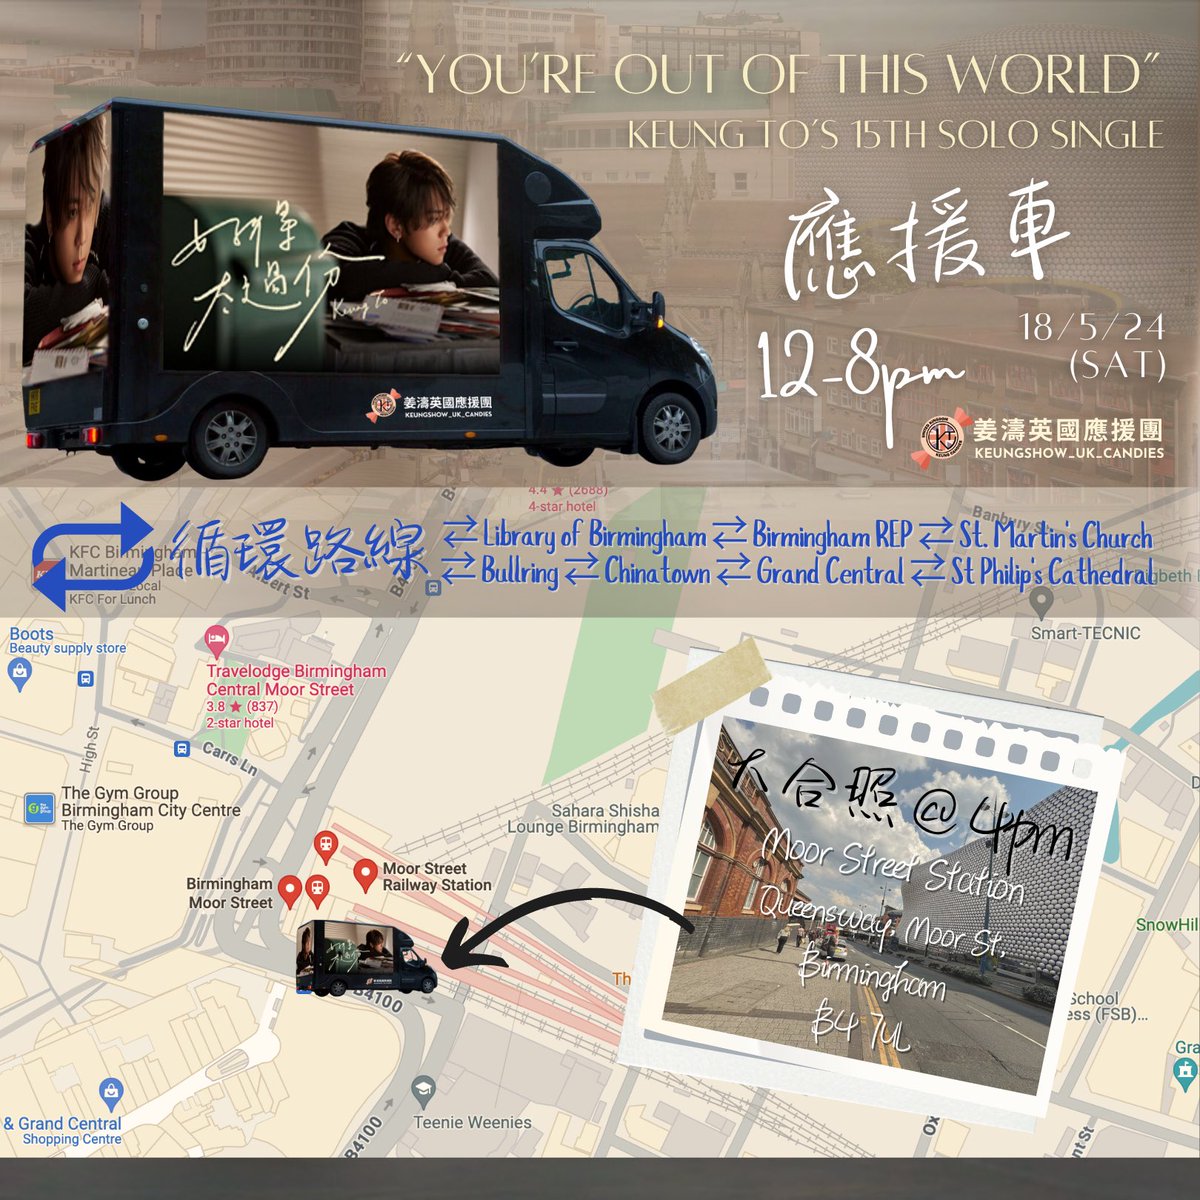 Digital truck featuring Keung To’s 15th solo single,《好得太過份'》(You’re out of this world) will be around #Birmingham this Saturday! ~ Join us and let’s show our love & support! ￼❤️🥰
#KeungTo #姜濤
#好得太過份 #YoureOutOfThisWorld
#cantopop